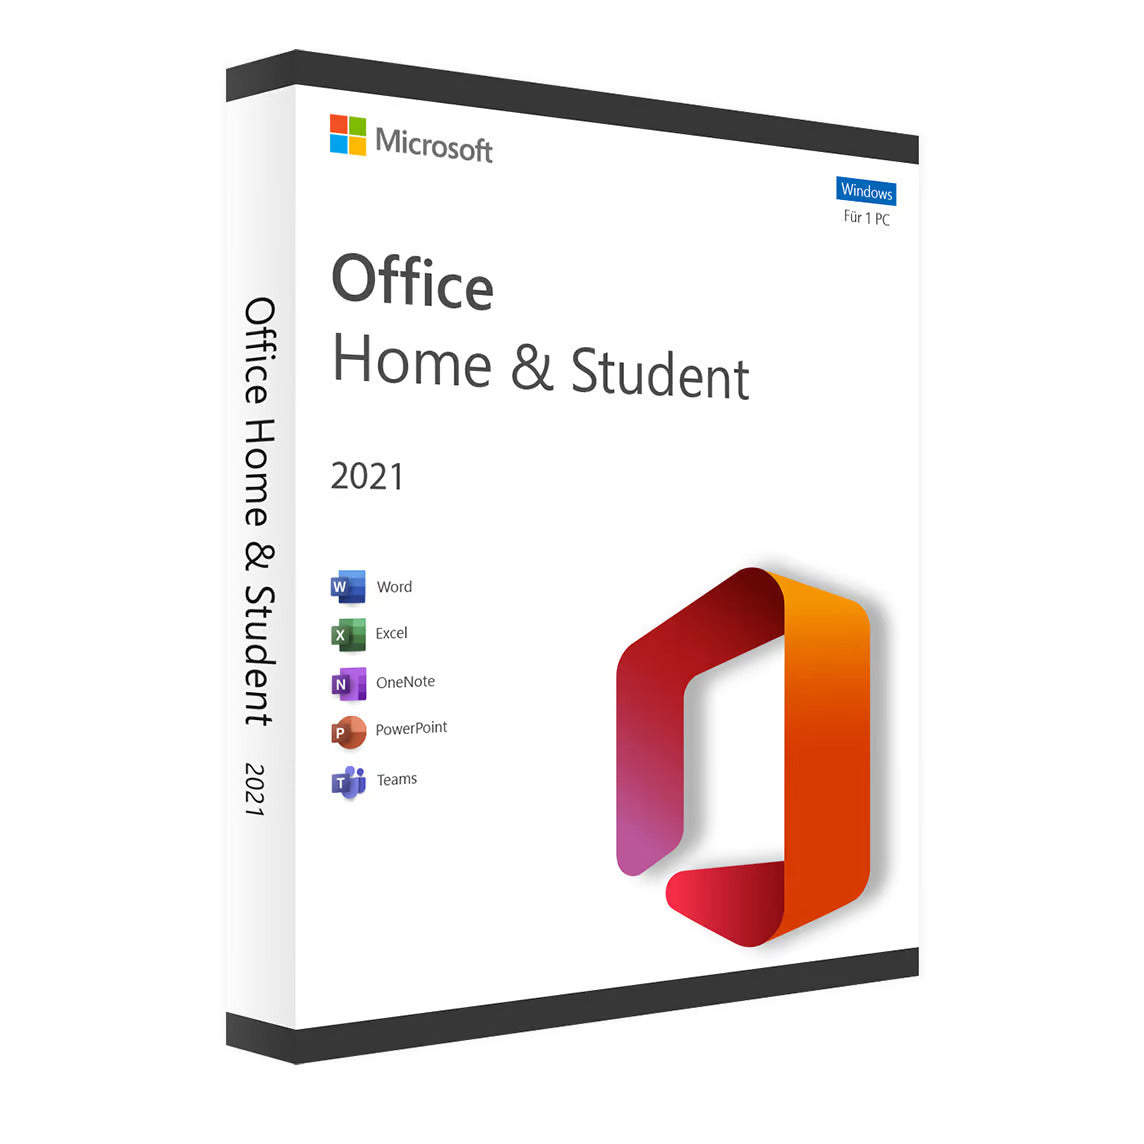 Microsoft Office Home and Student 2021 for Windows PC | Transferable License,1 user, Perpetual lifetime